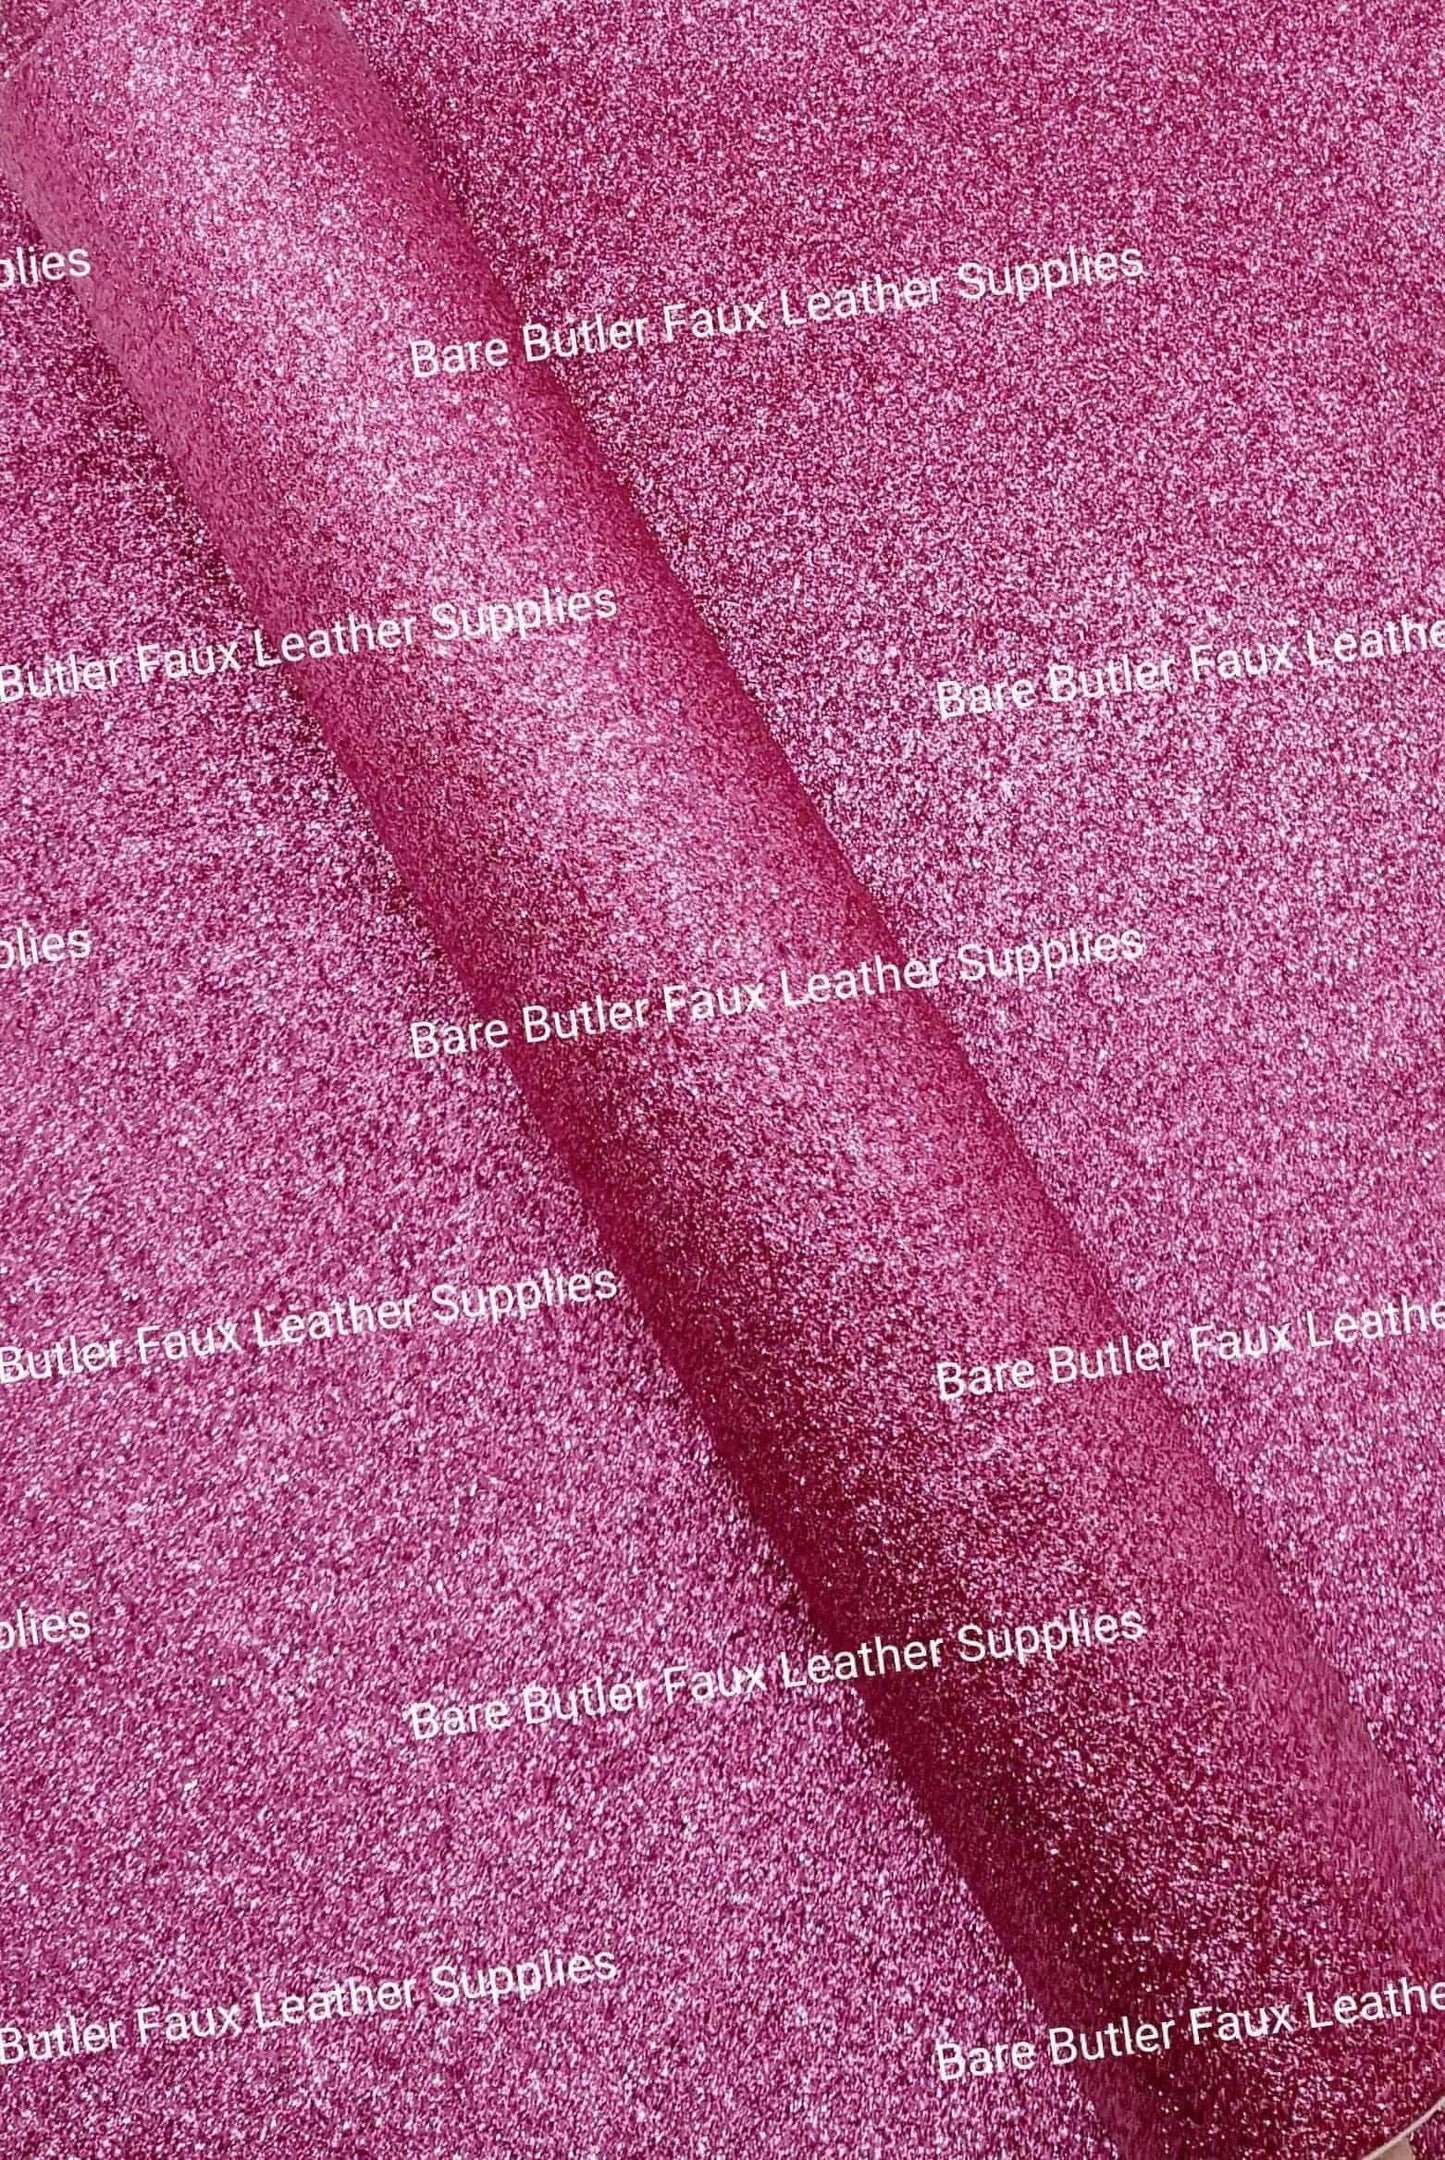 Glitter - Deep Pink - Berry, Faux, Faux Leather, Fine, Glitter, Leather, leatherette, Super - Bare Butler Faux Leather Supplies 